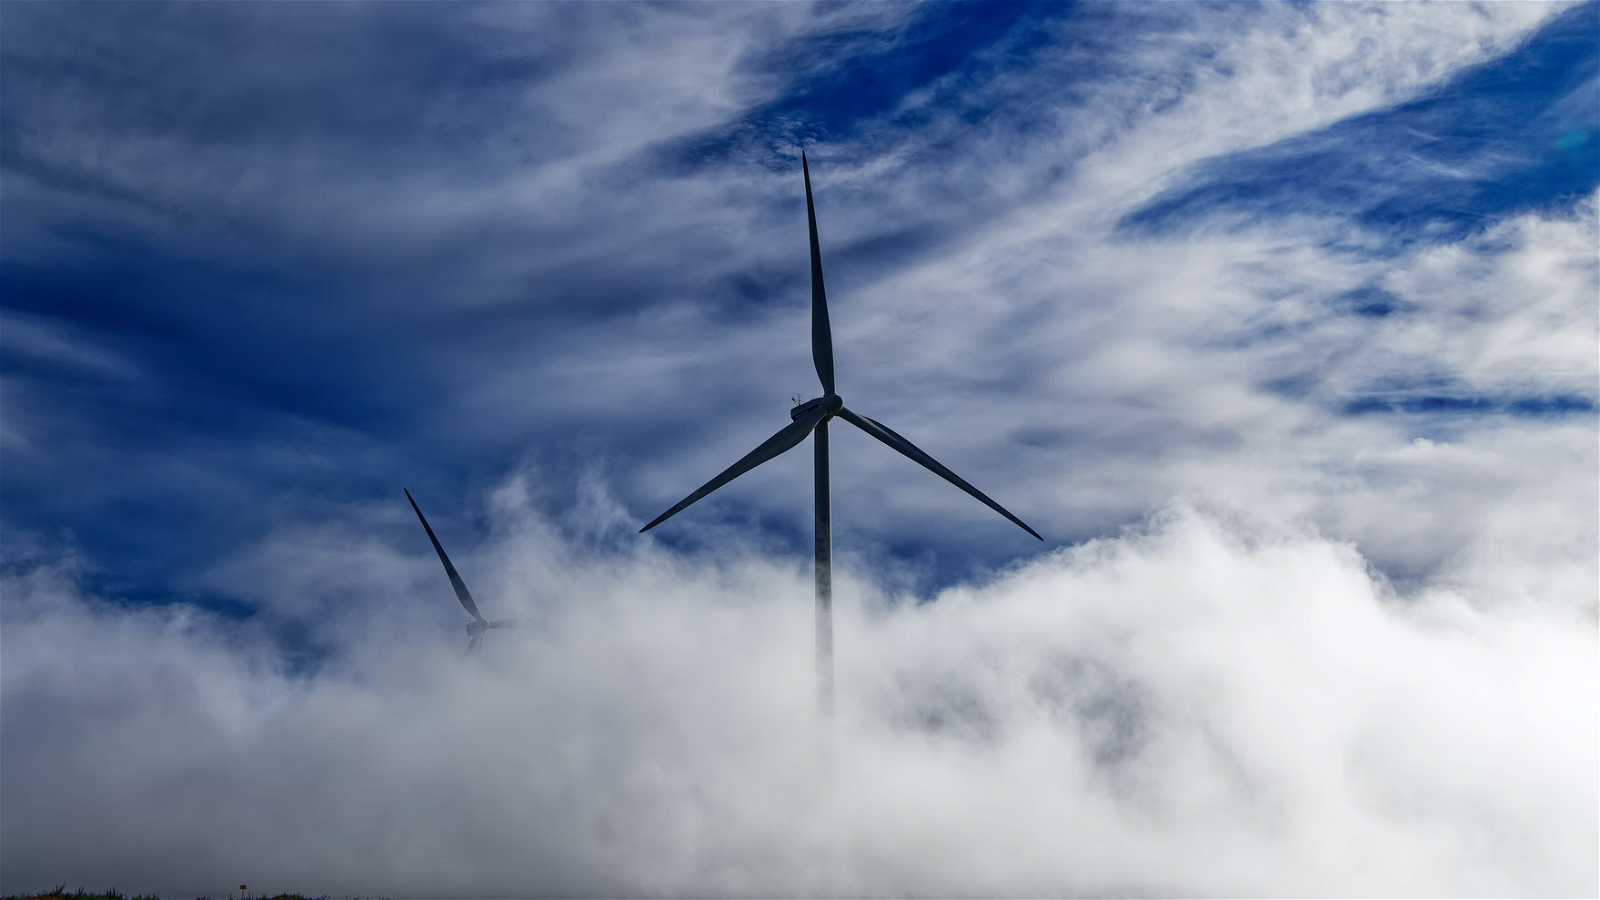 Europe must seize its chance to lead the world in cleantech